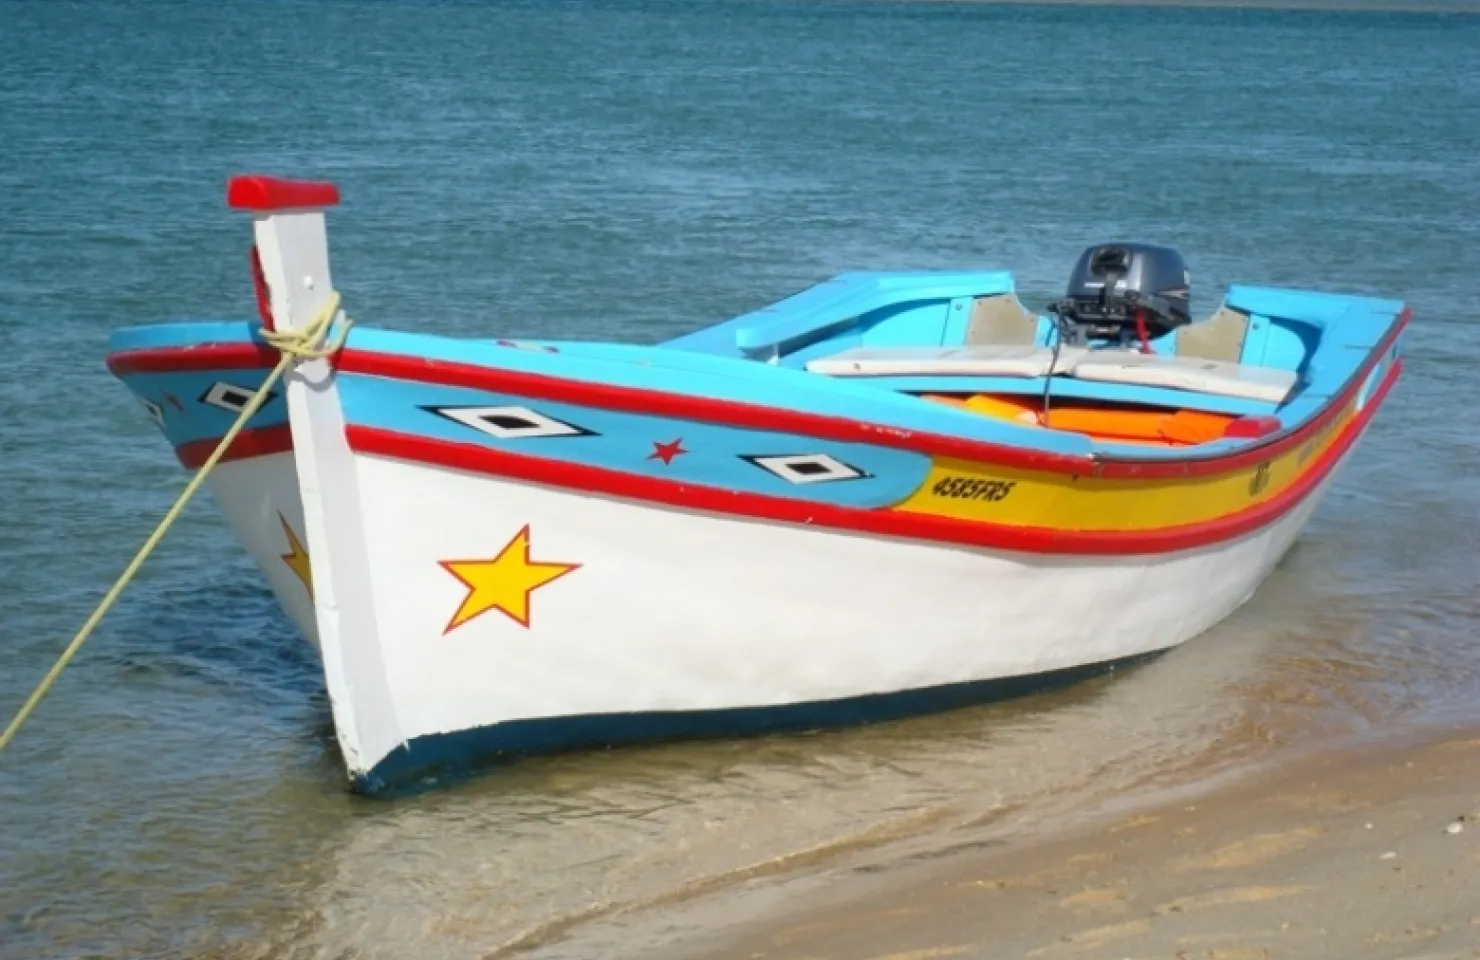 Traditional Boat Trip on The Ria Formosa - Algarve Boat Trips and tours